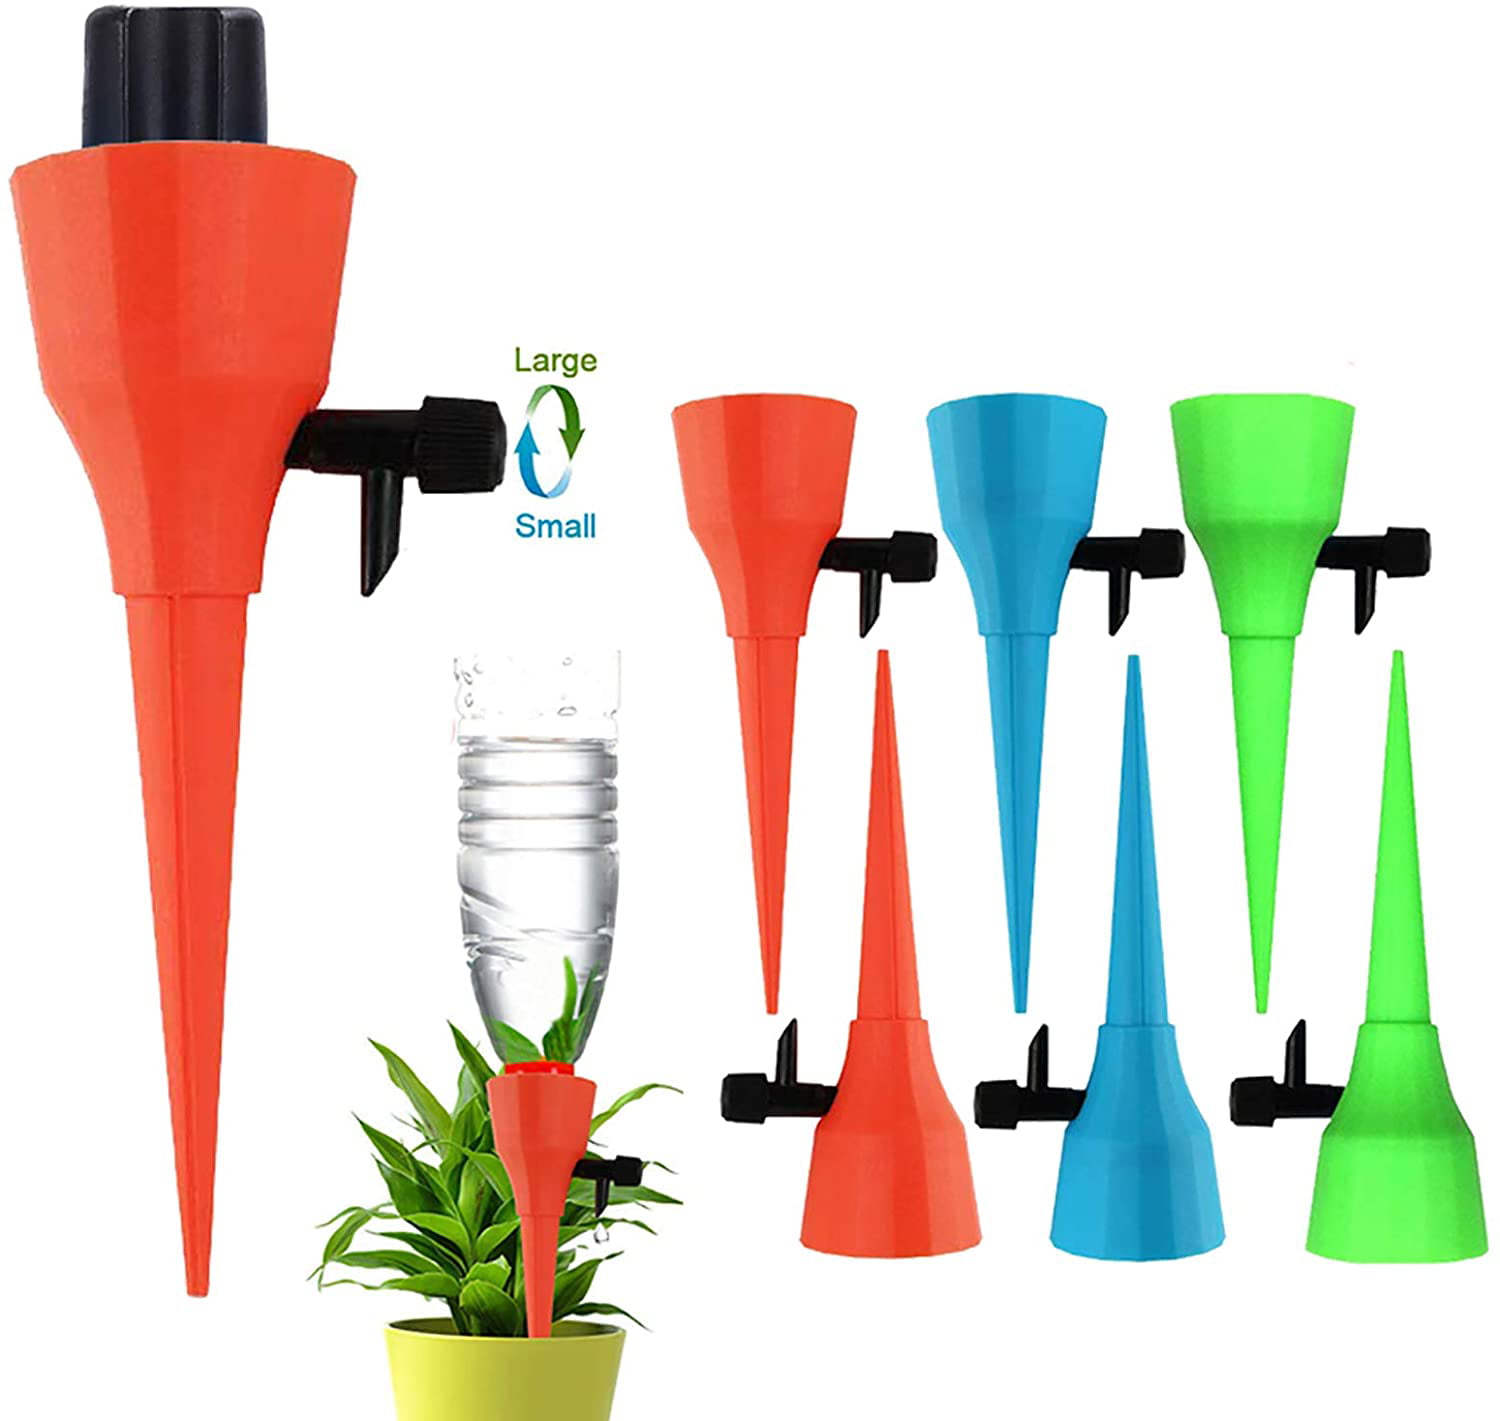 6 pack plant water funnel dripper,Self Watering Spikes Plant Watering Devices With Slow Release Control Valve Switch,Anti-Tilt Anti-Fall Design,Plant Waterer,Automatic Vacation Drip Watering Bulbs 